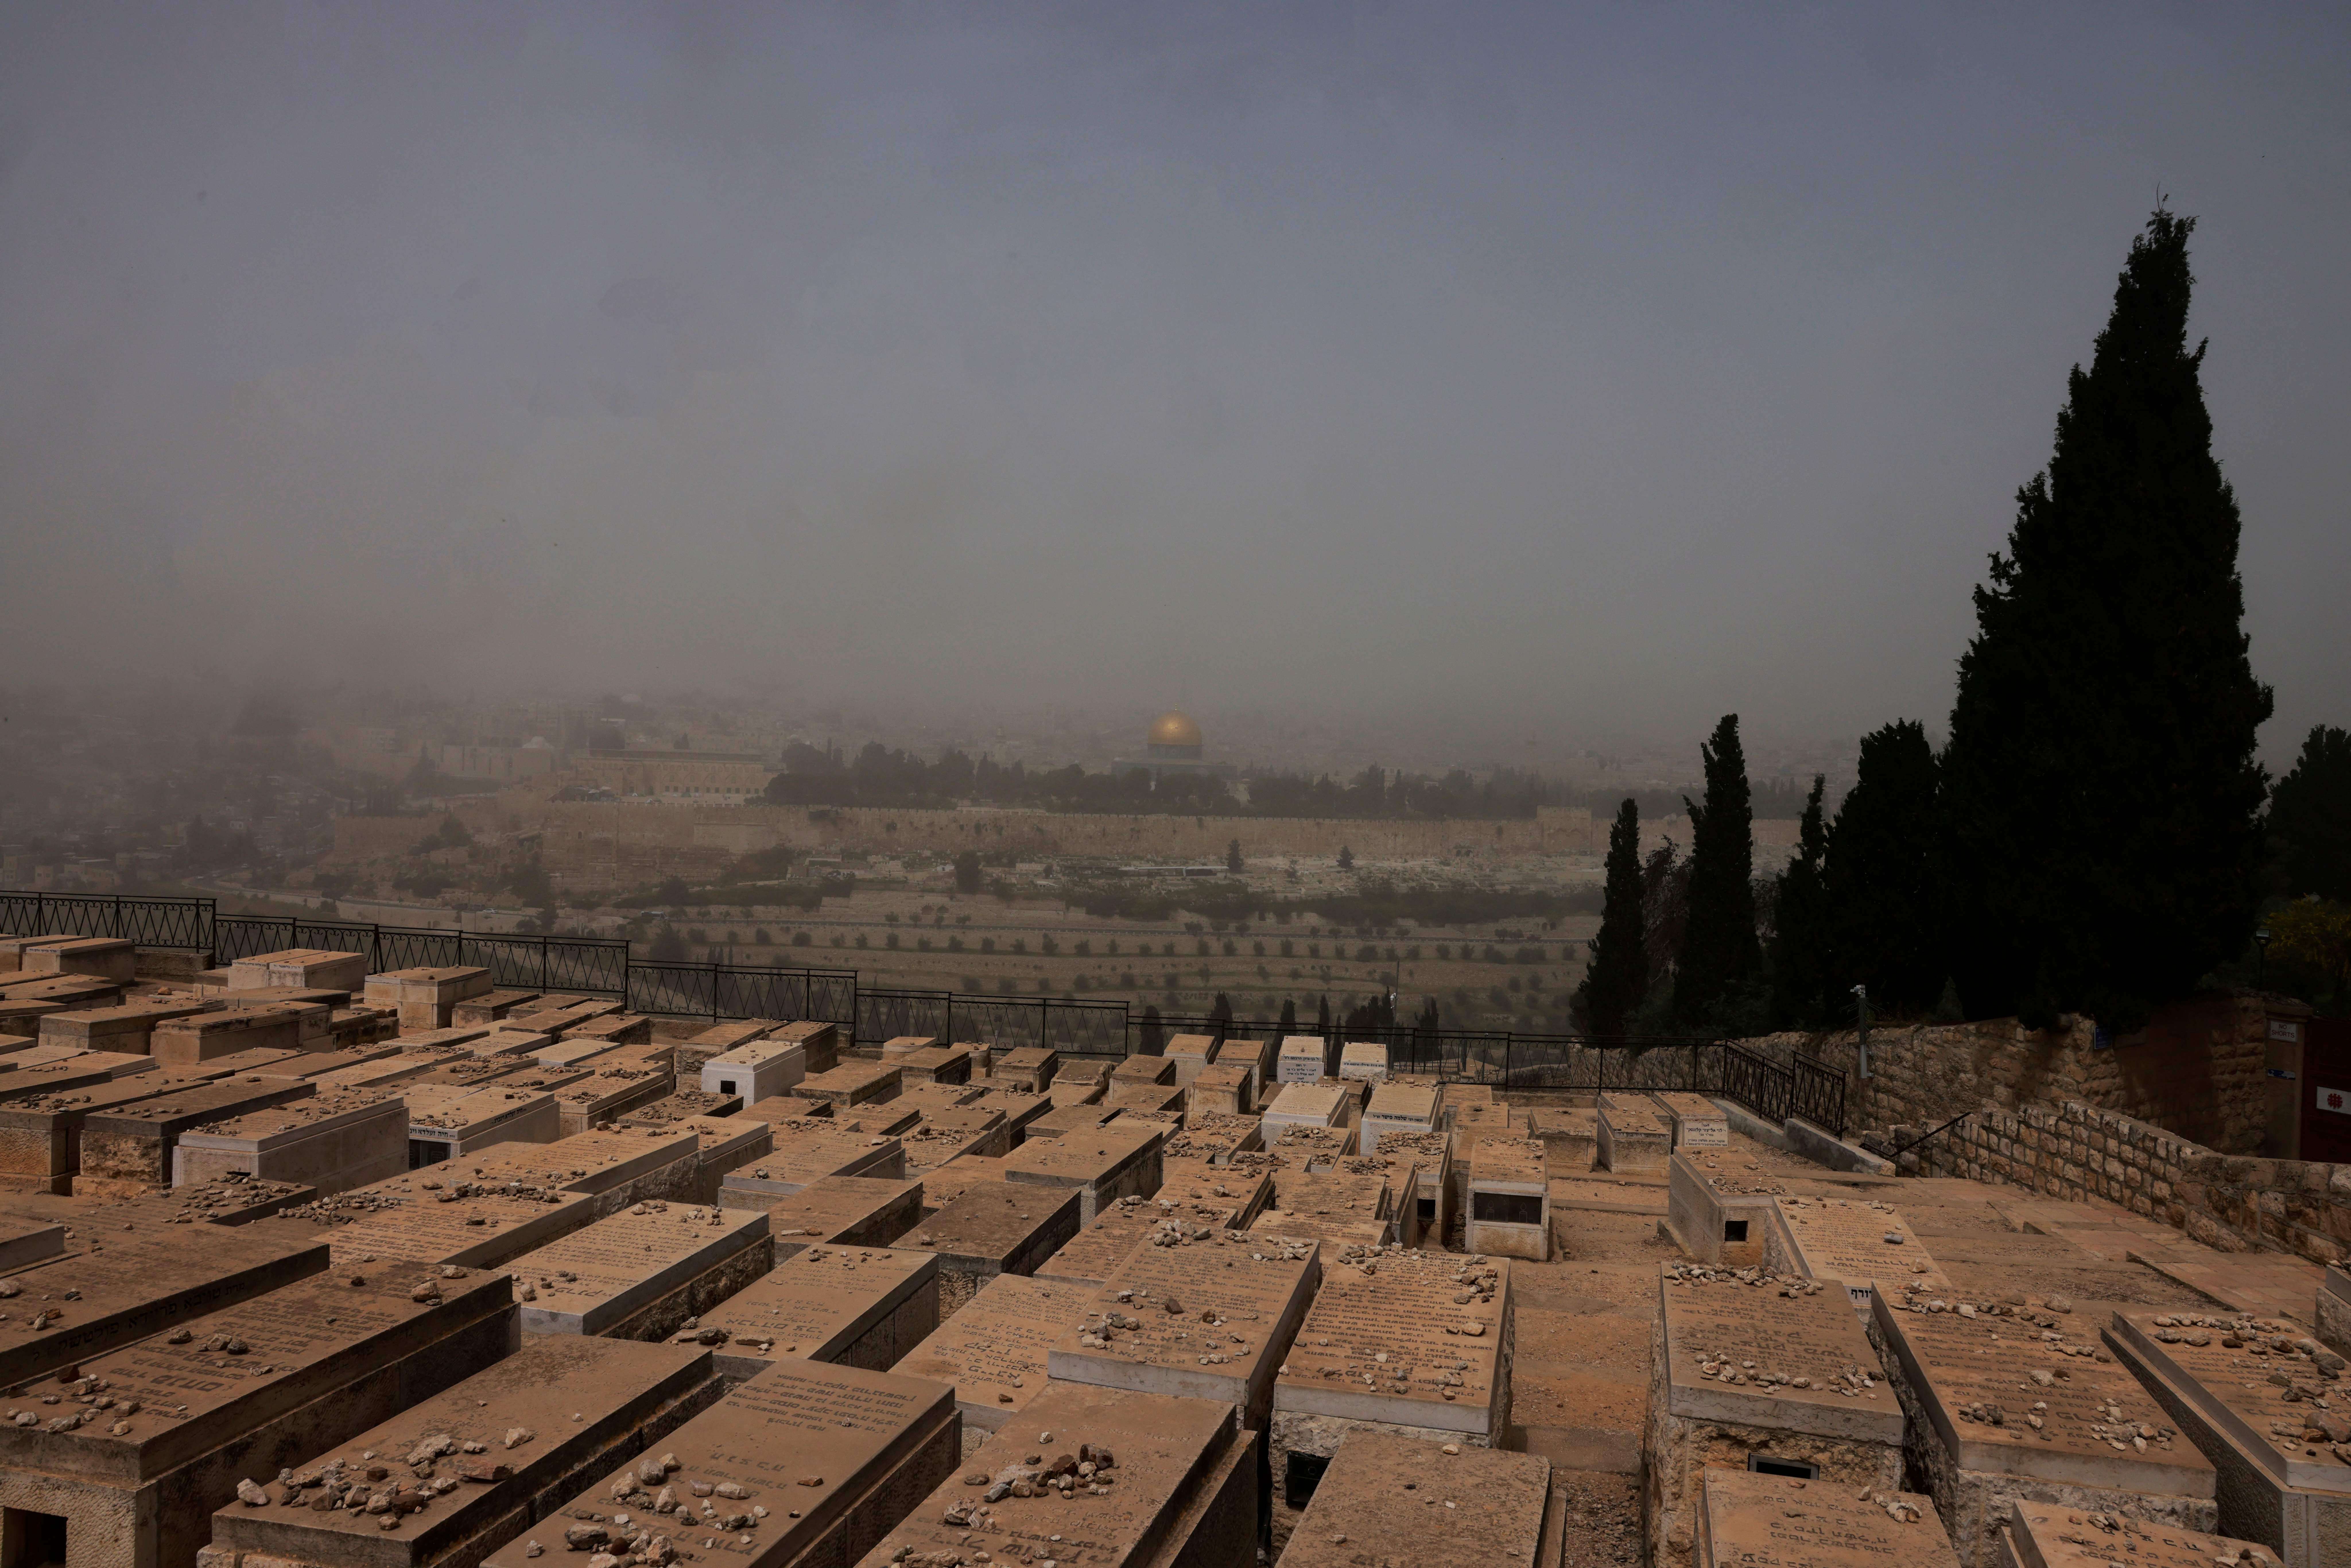 A view of Jerusalem's Old City, during a dust storm, from the Mount of Olives.